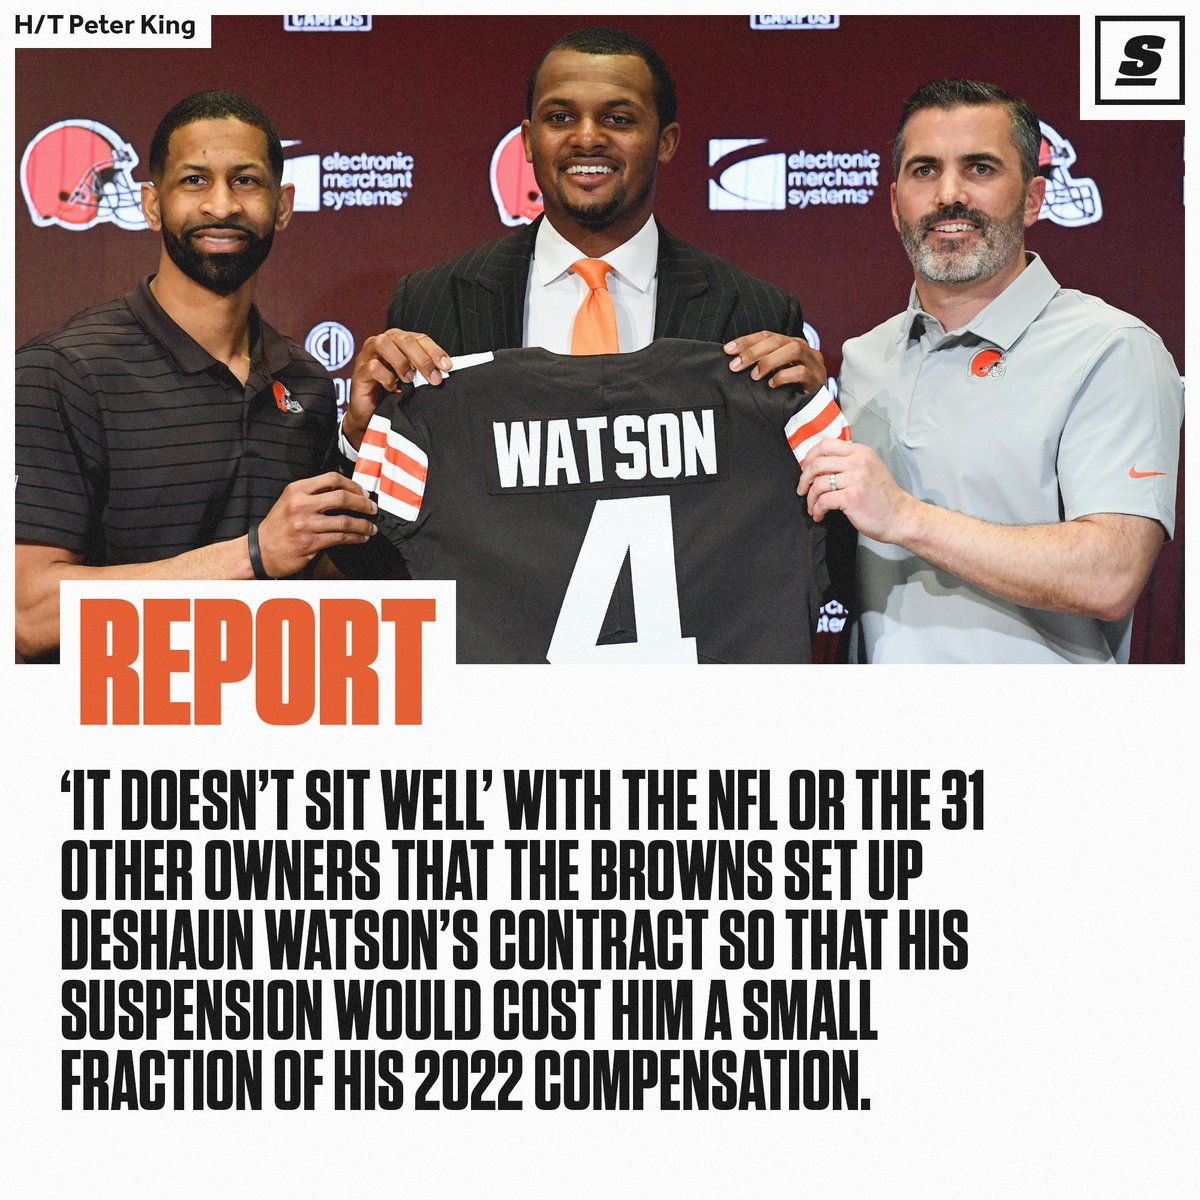 NFL owners are reportedly upset about the way the Browns structured DeShaun Watson's contract.